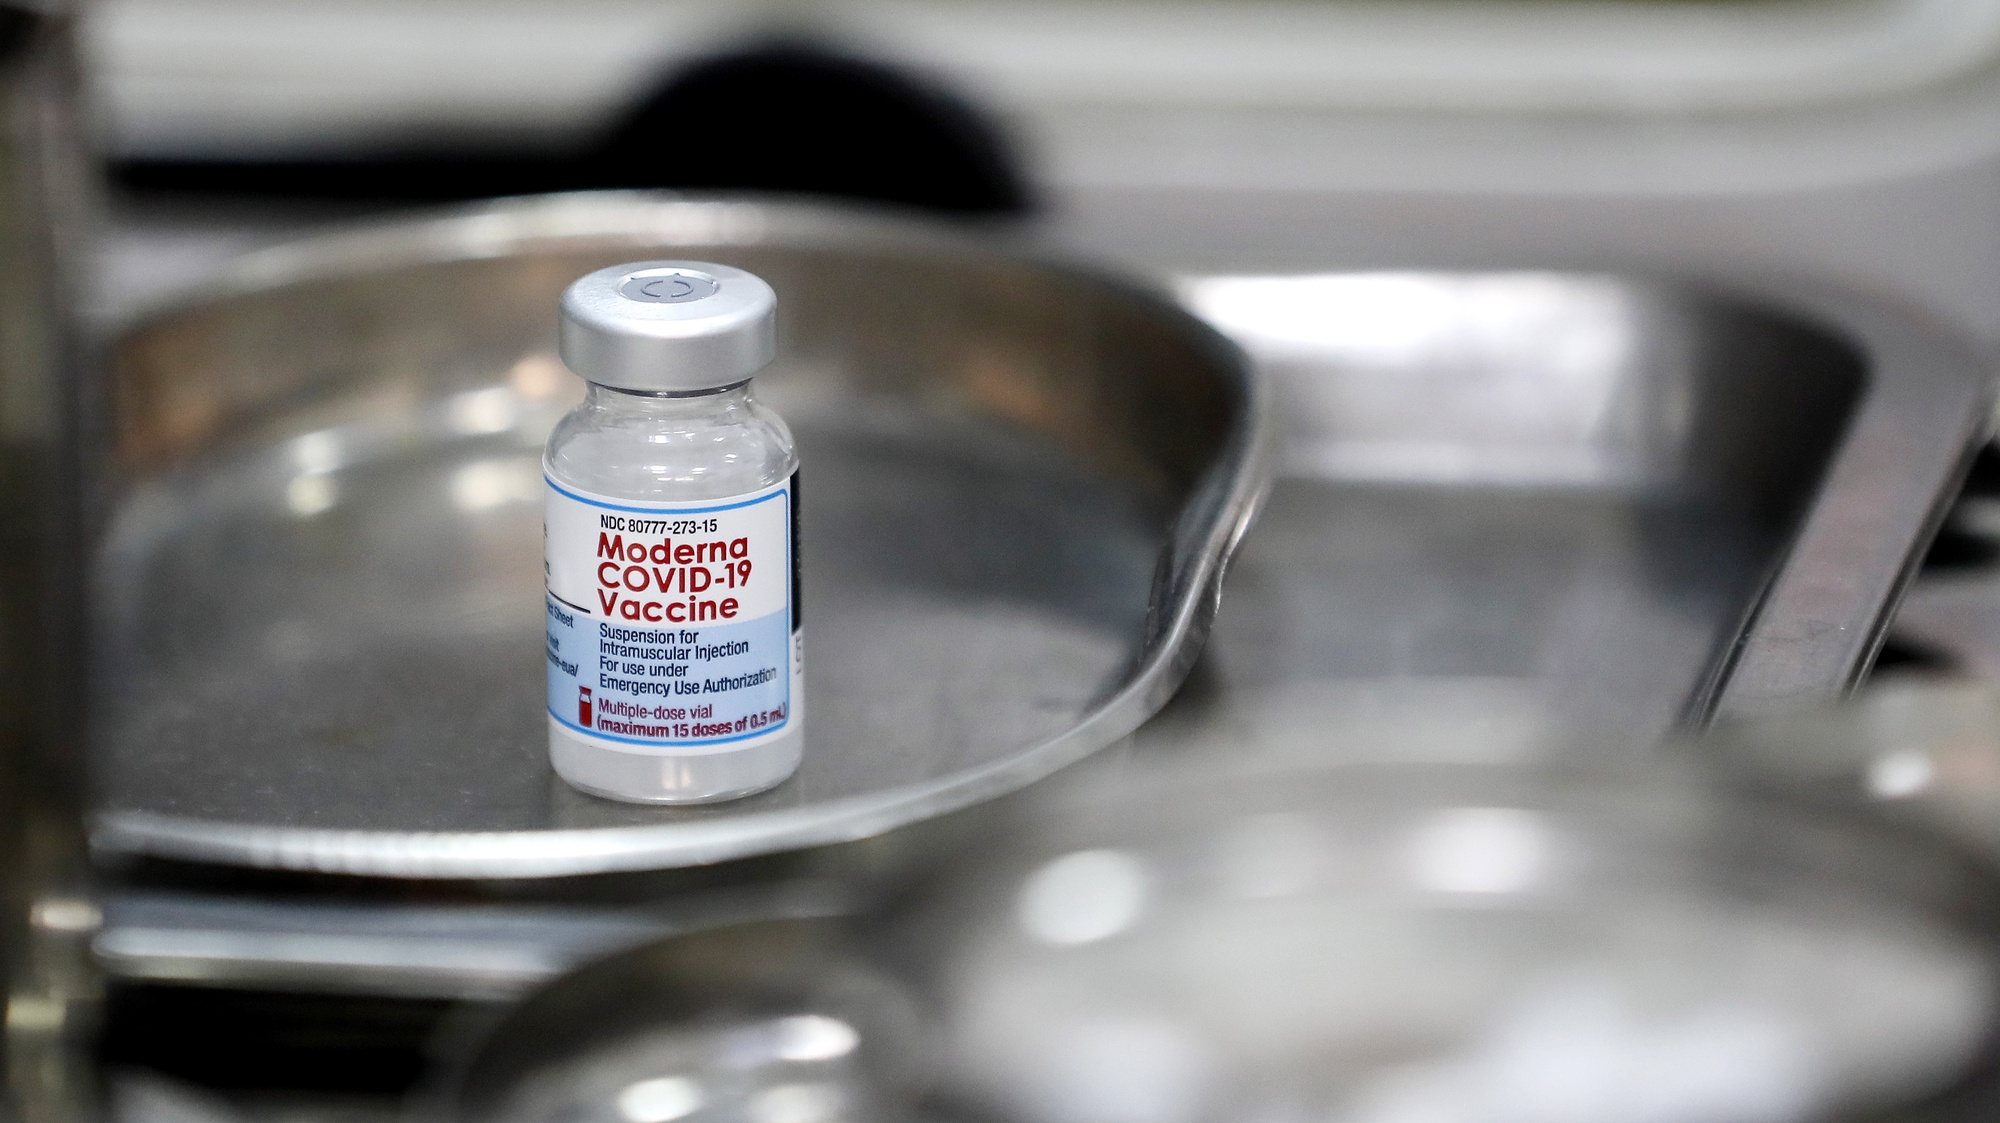 epa09429829 (FILE) - A vial of Moderna COVID-19 vaccine sits on a tray, in Hanoi, Vietnam, 27 July 2021 (reissued 26 August 2021). Japan&#039;s health ministry suspended the usage of around 1.6 million doses of Moderna COVID-19 vaccine after the discovery of foreign material in a production line.  EPA/LUONG THAI LINH